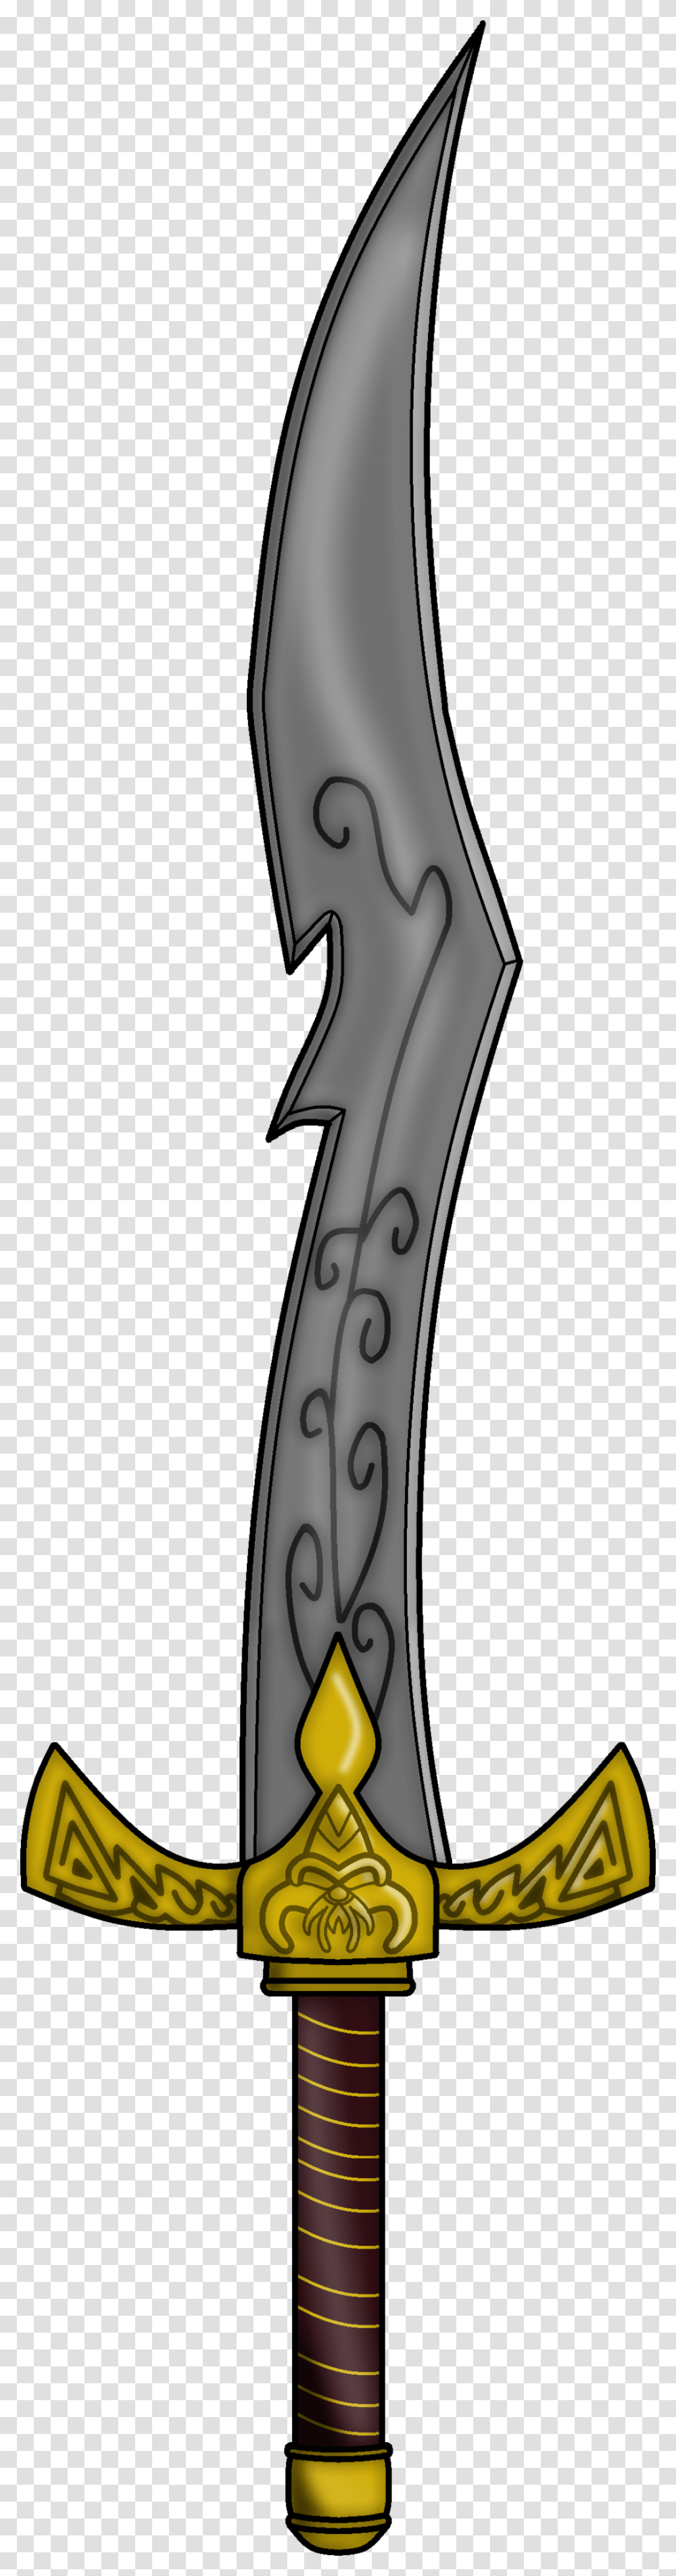 Vorpal Blade Once Upon A Time, Sword, Weapon, Weaponry Transparent Png